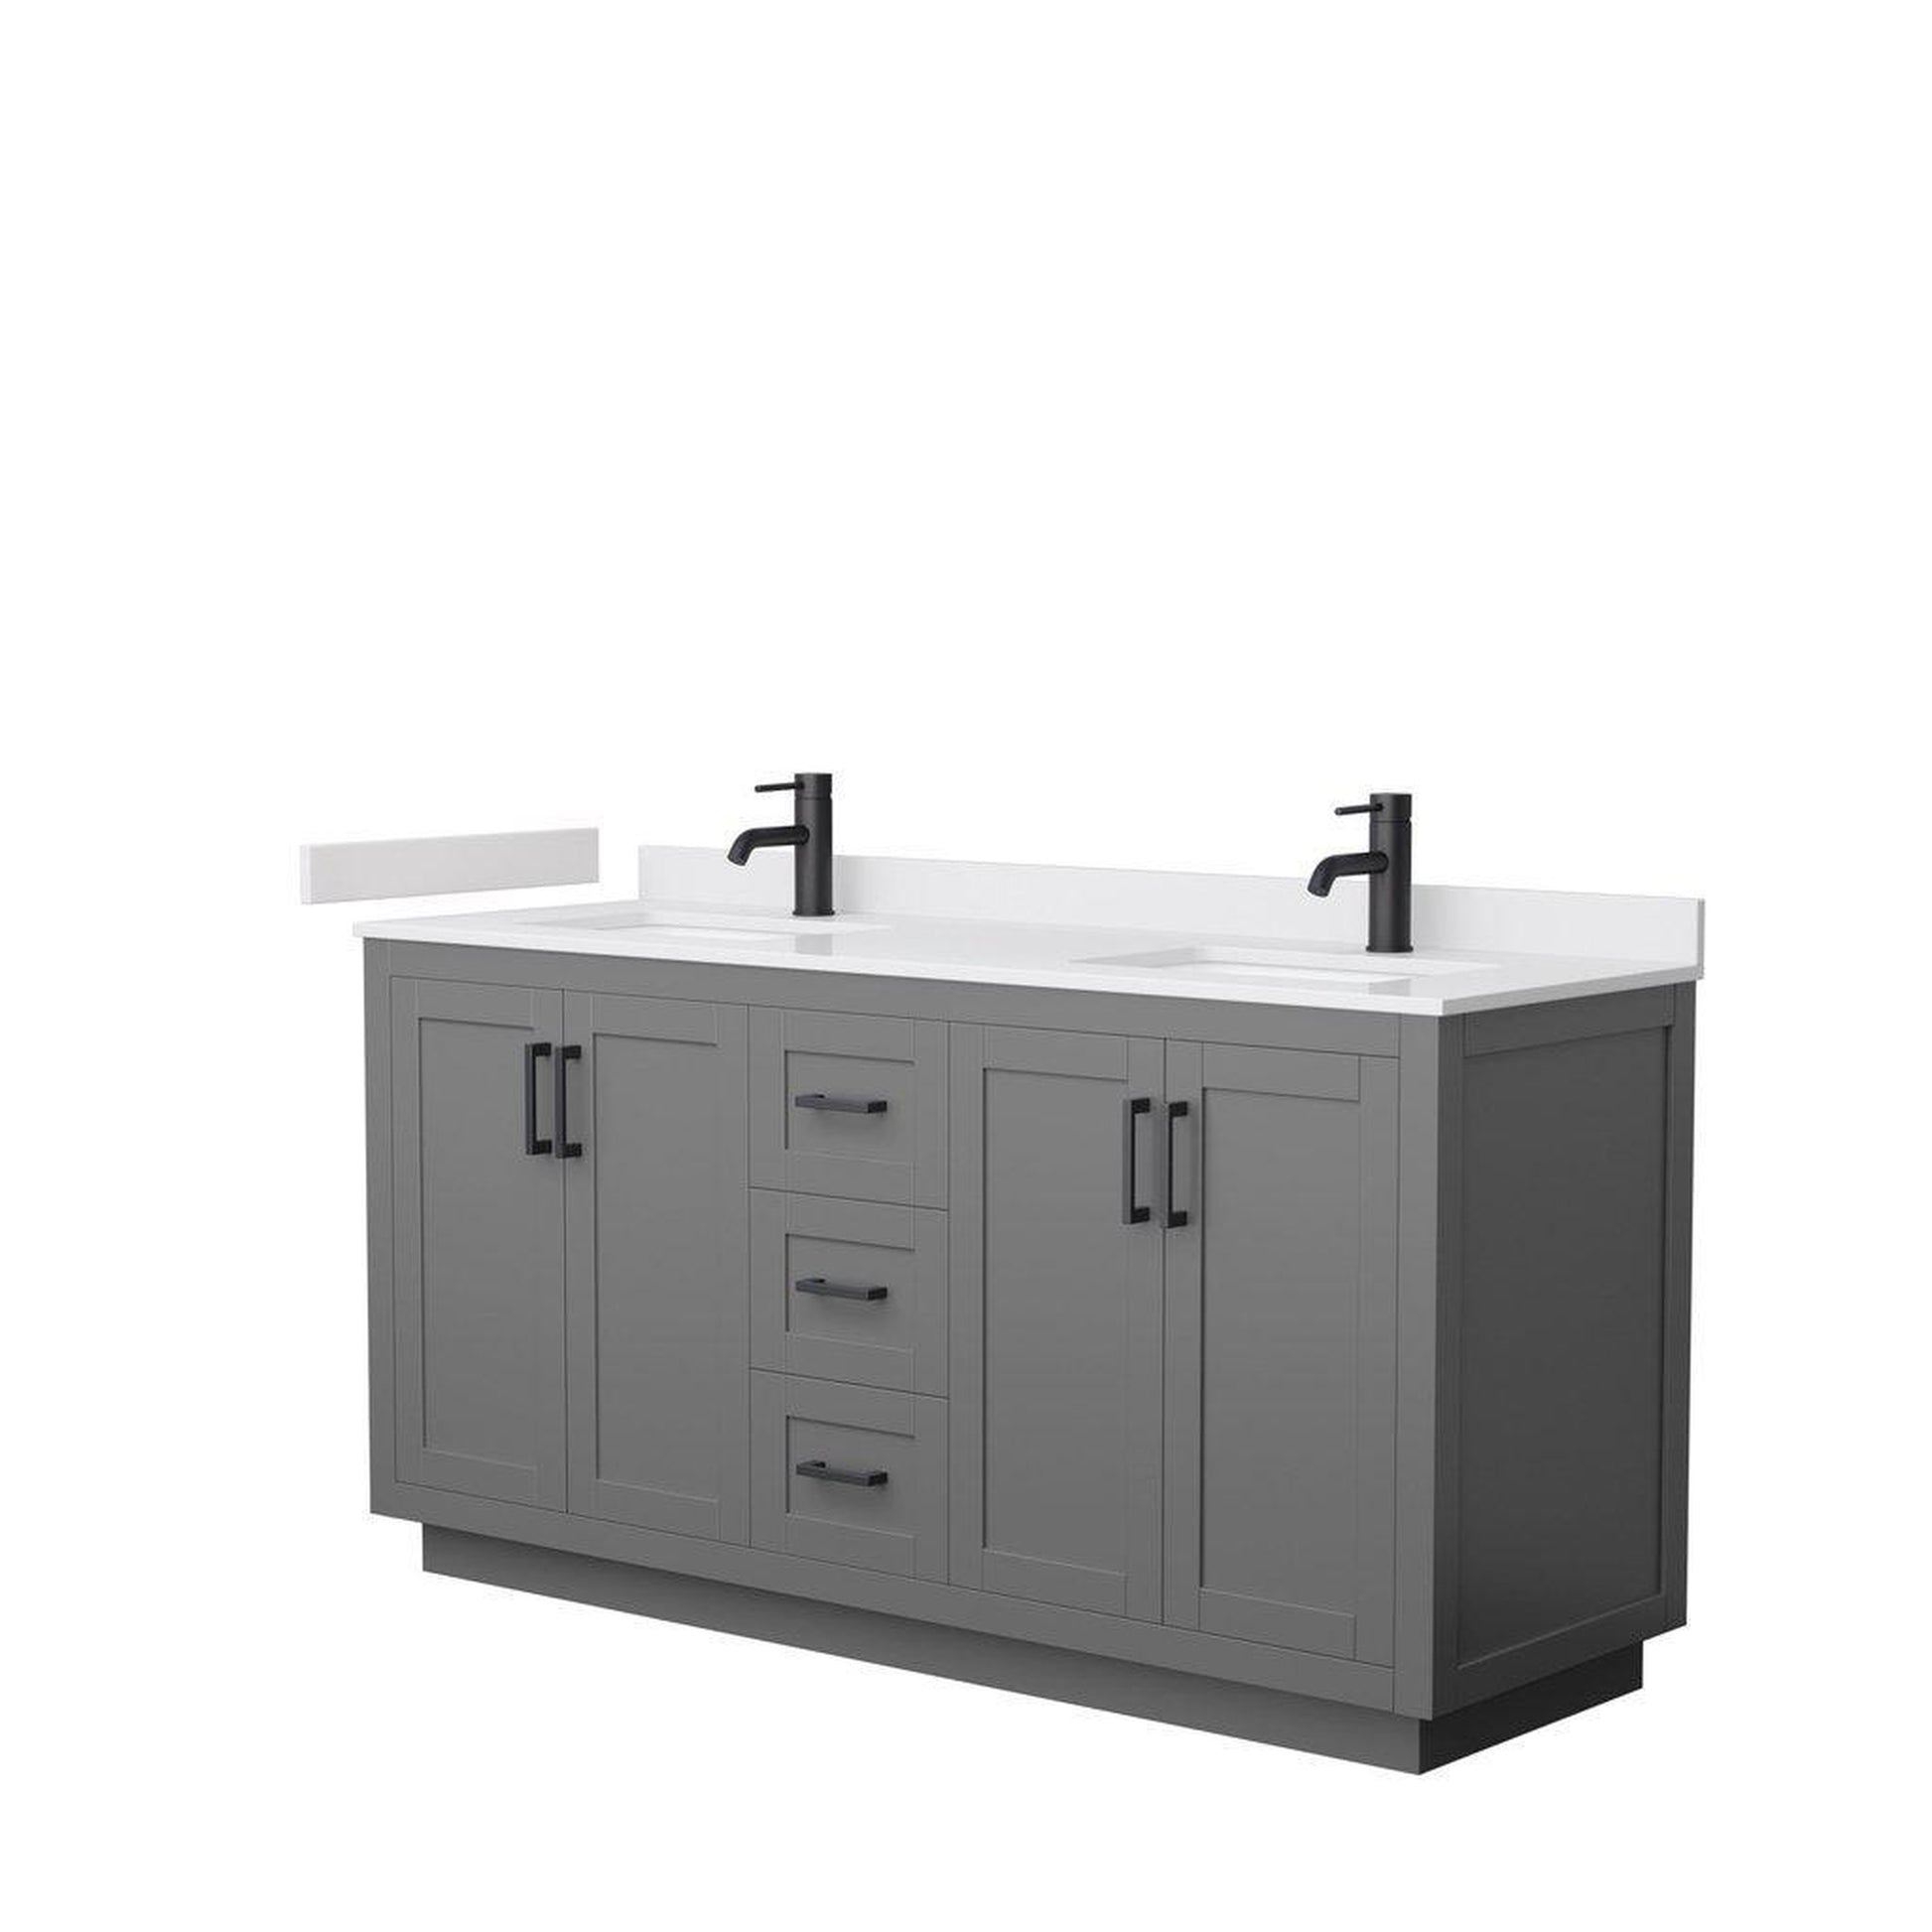 Wyndham Collection Miranda 66" Double Bathroom Dark Gray Vanity Set With White Cultured Marble Countertop, Undermount Square Sink, And Matte Black Trim